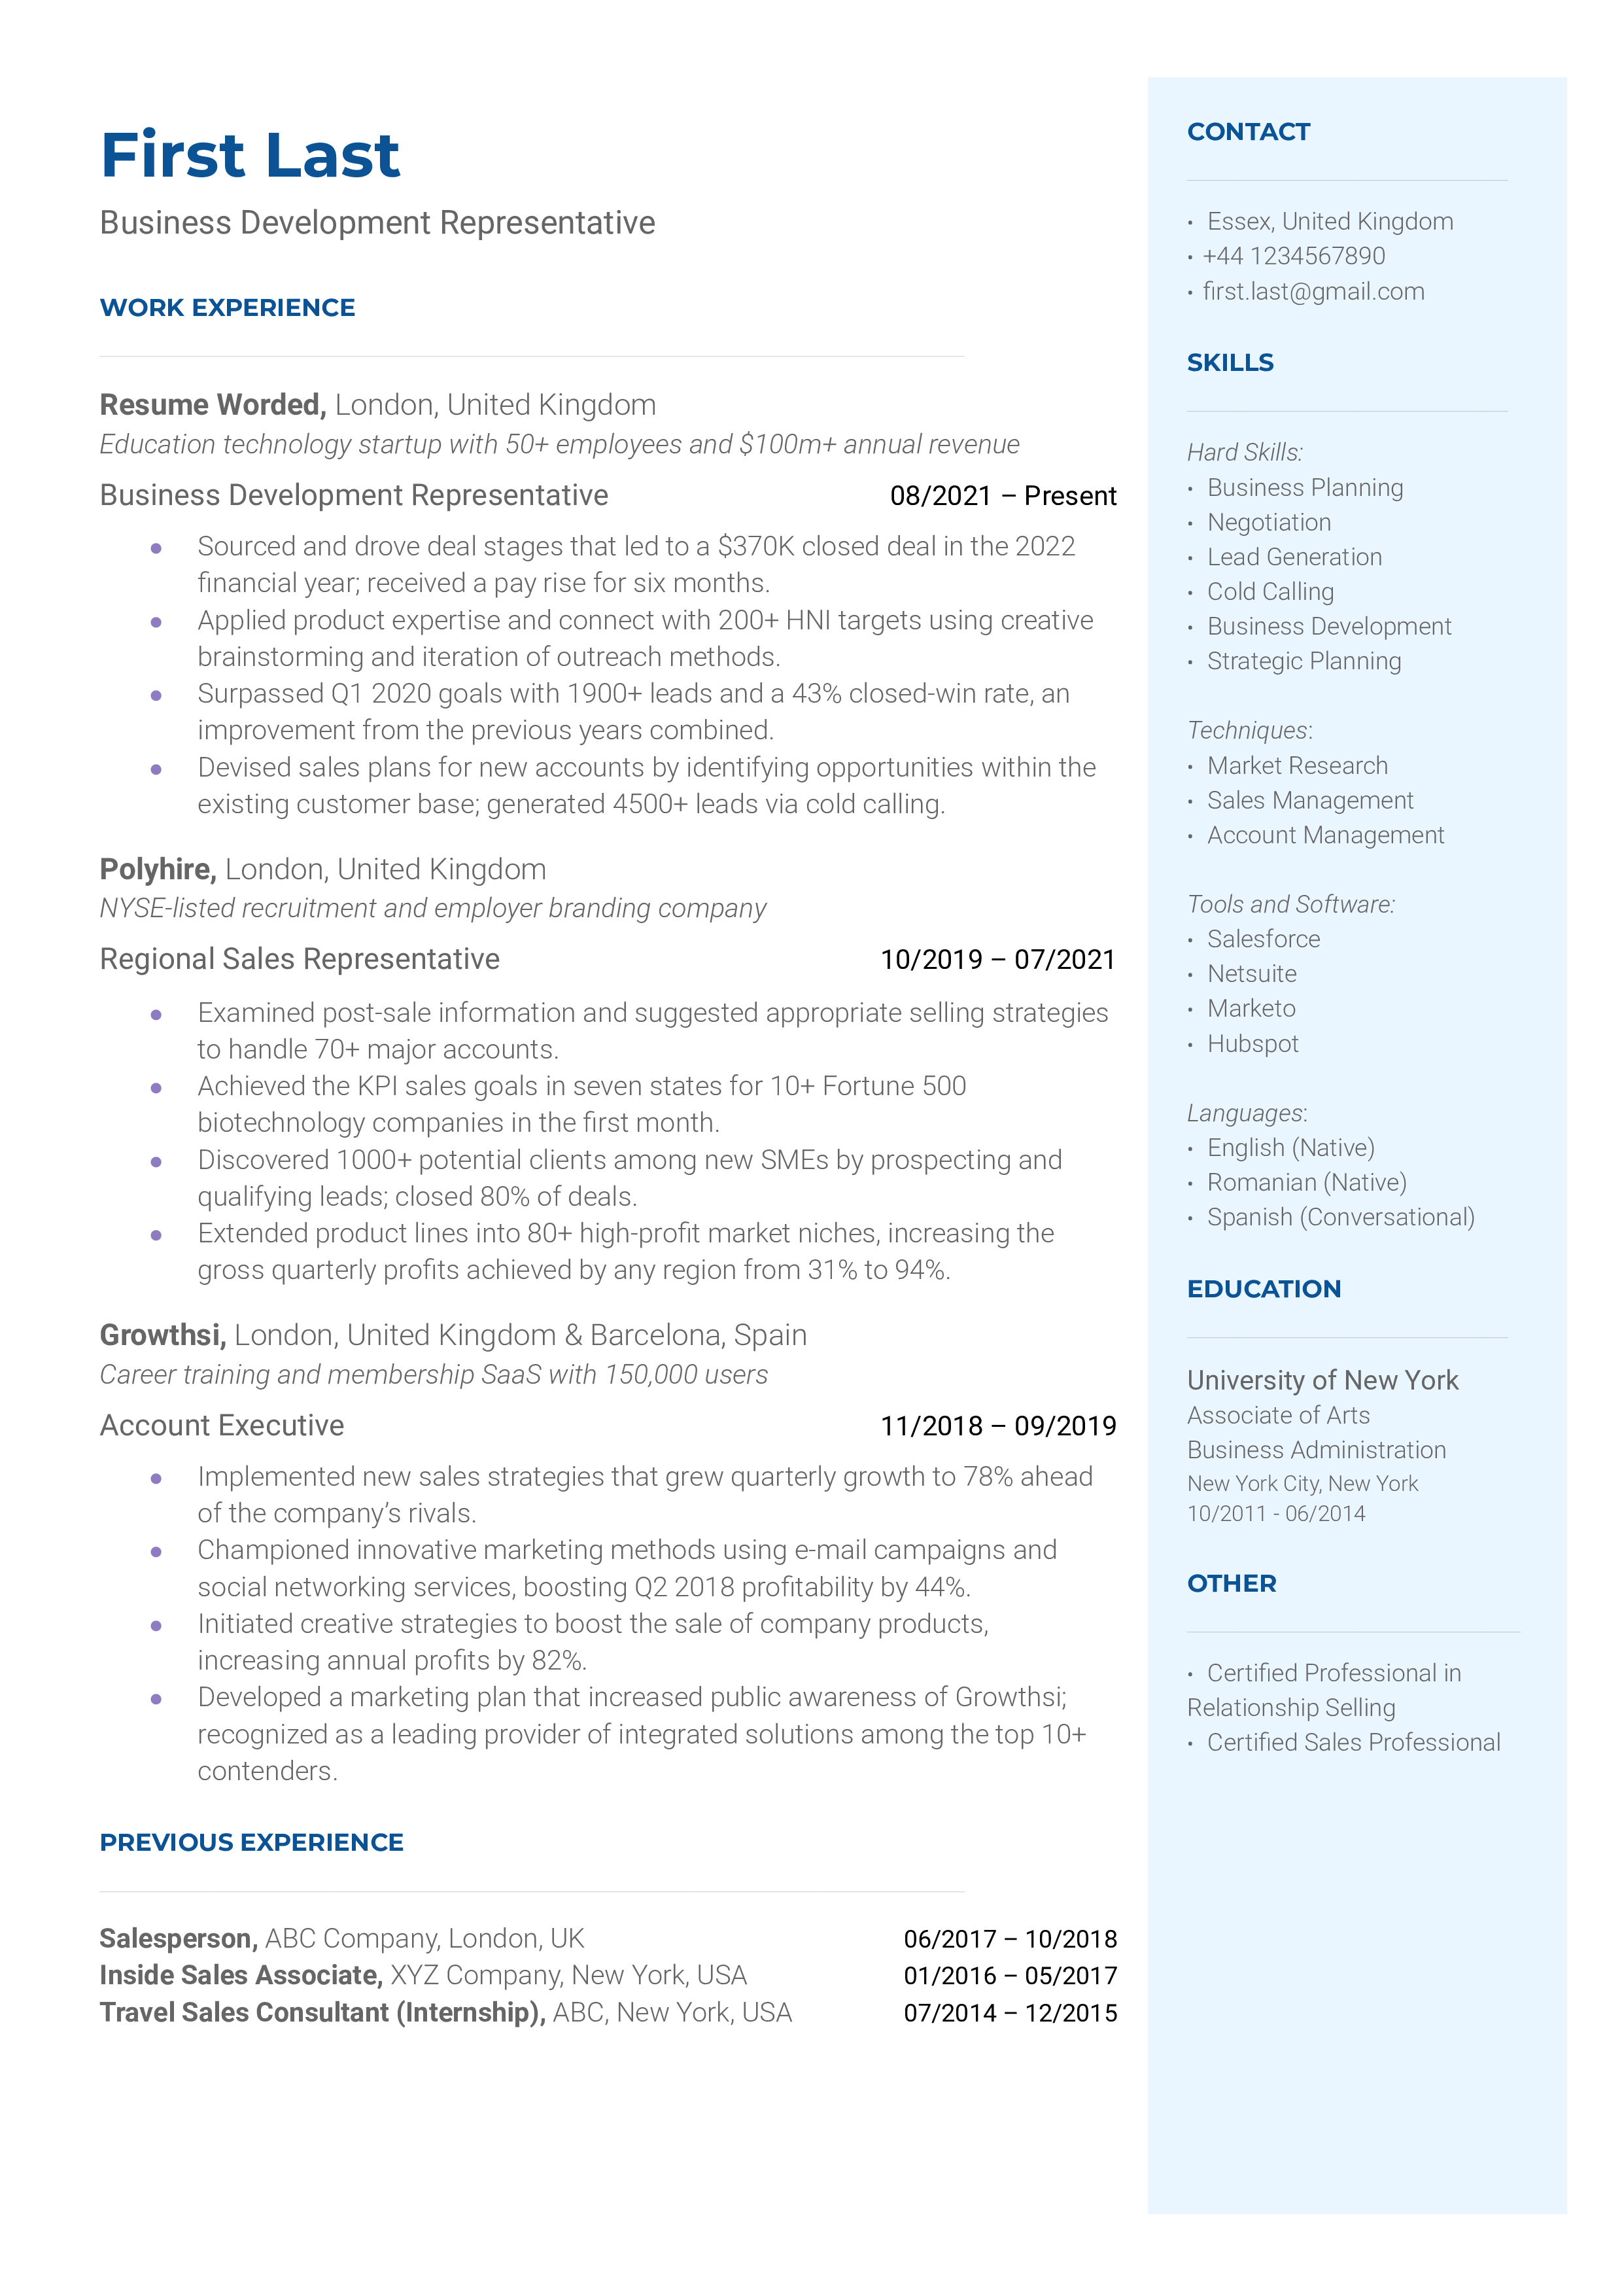 A resume for a business development representative with a degree in business adminstration and experience as a sales representative.